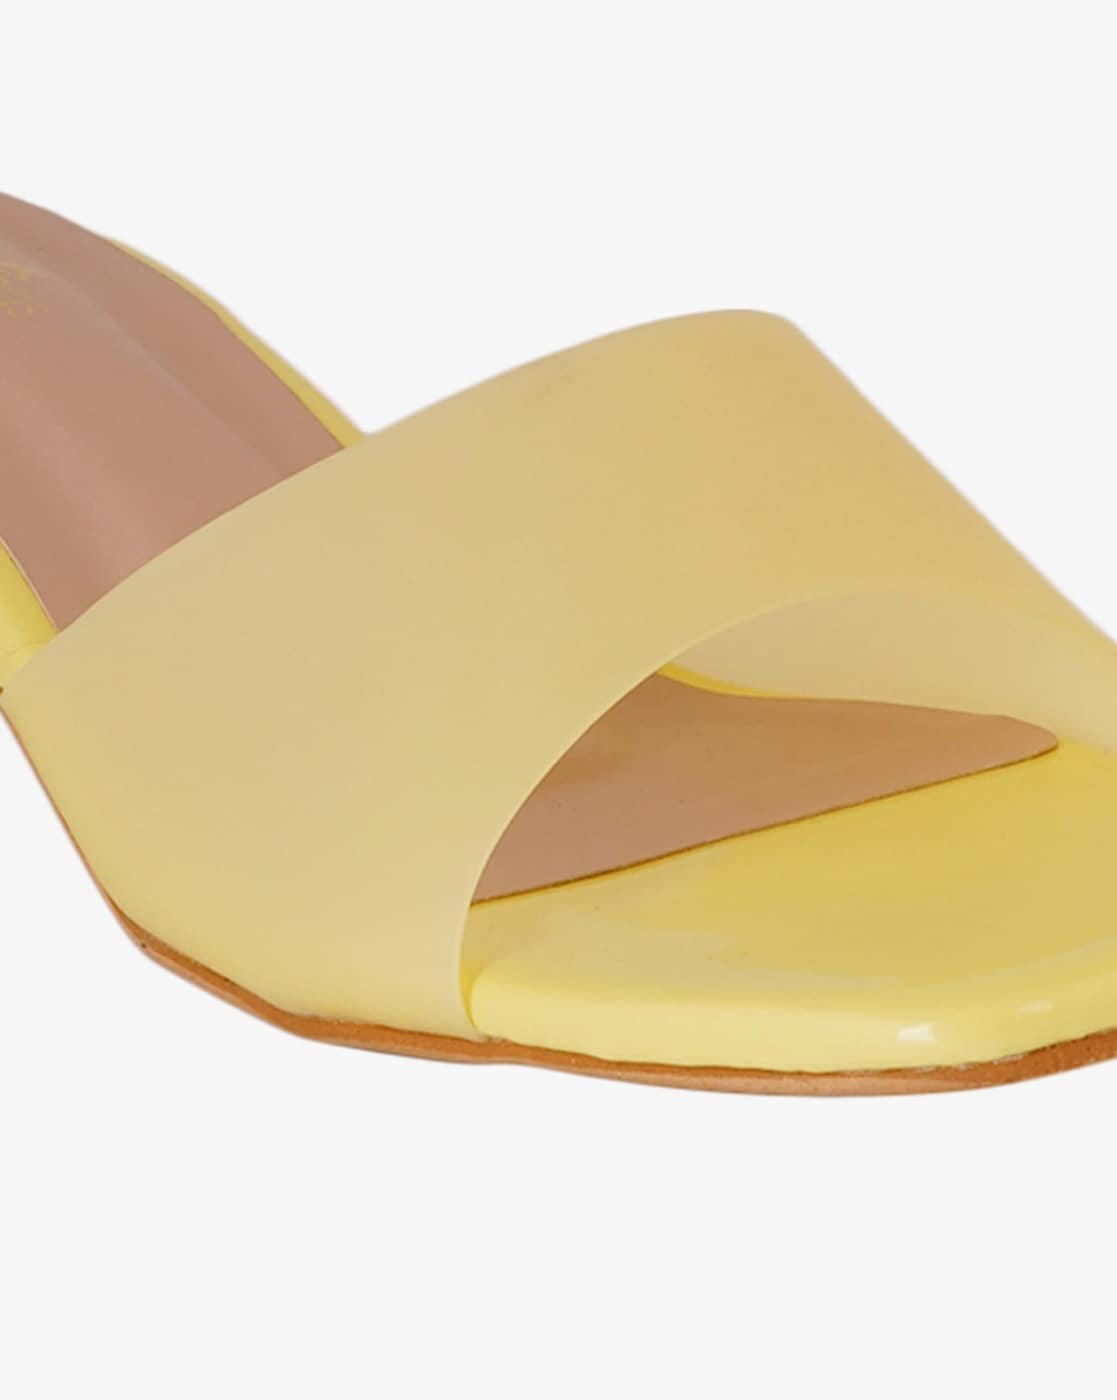 SKO Solid Yellow Single Toe Solid Sandals for women (UK 36) (Yellow) At Nykaa, Best Beauty Products Online